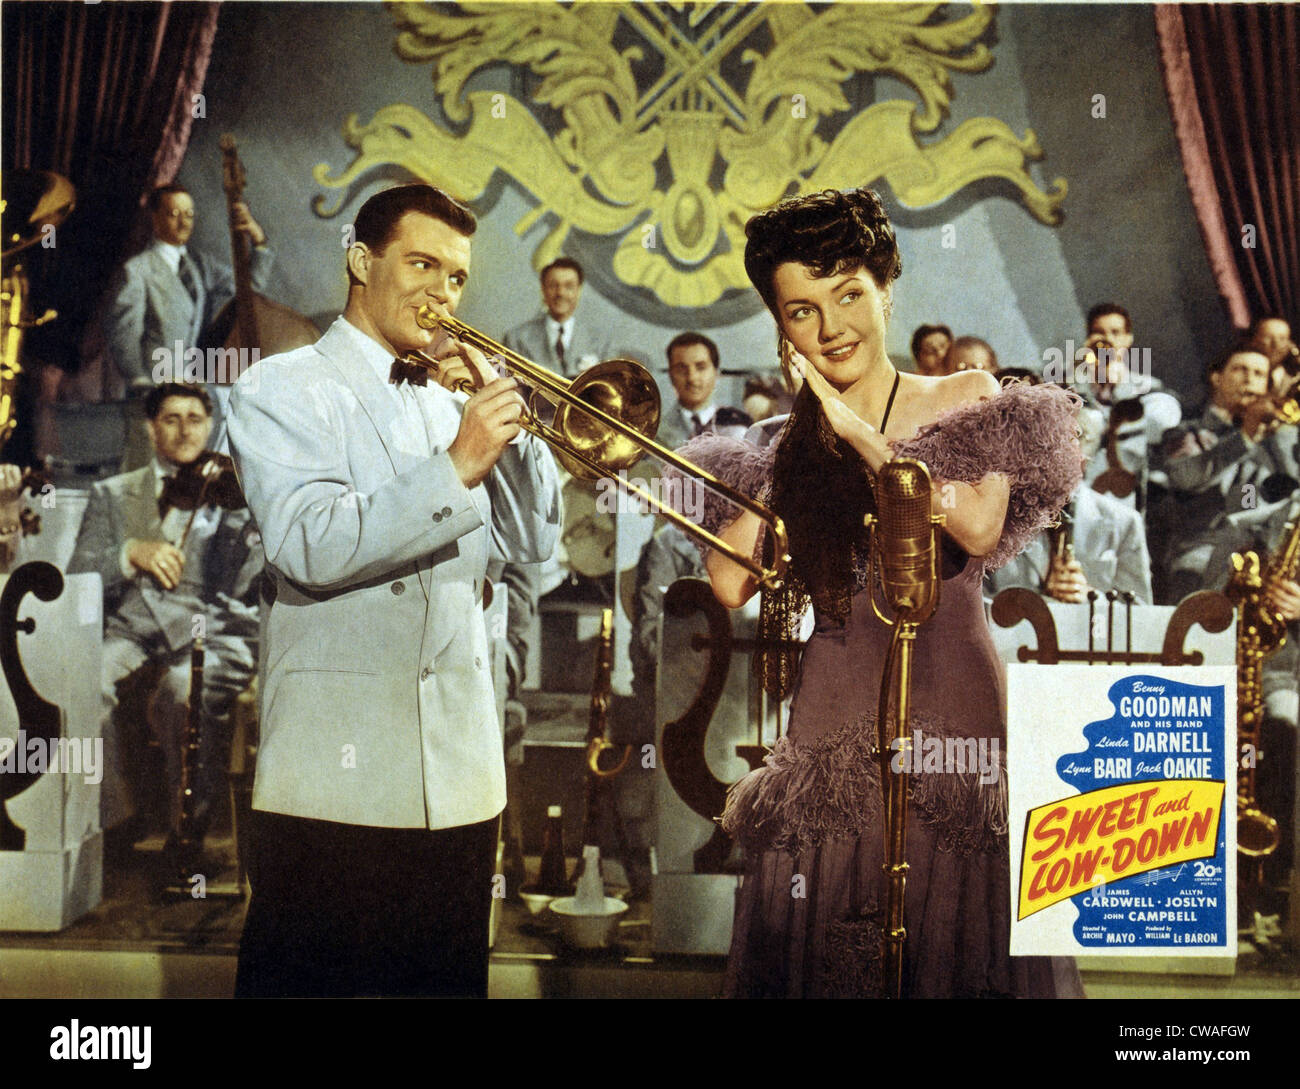 Lobby card for SWEET AND LOW-DOWN, showing stars Benny Goodman (1909-1986), playing trombone, and Linda Darnell (1921-1956), on Stock Photo